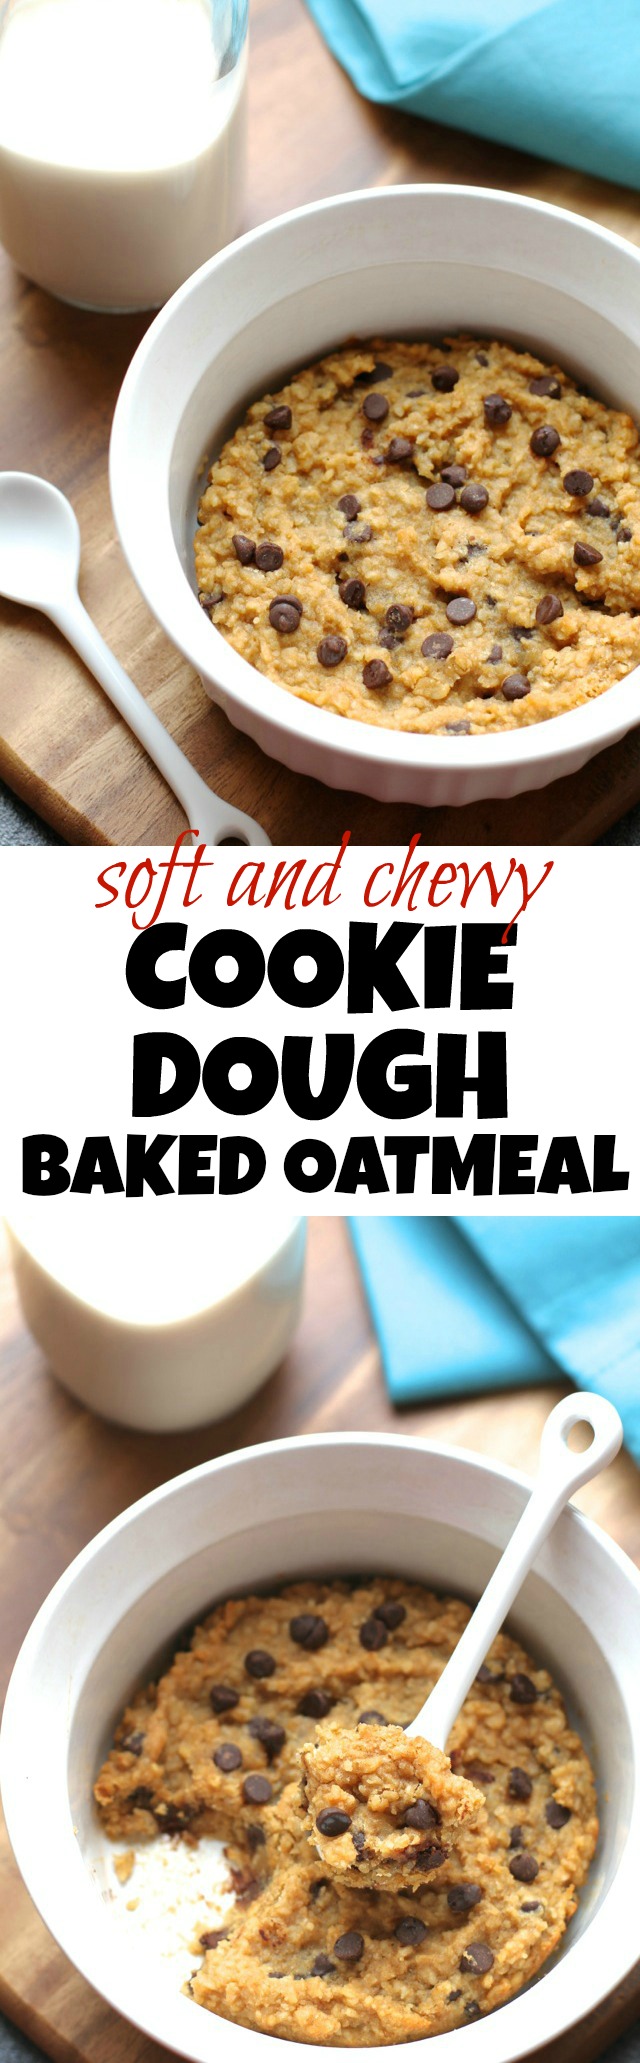 Oatmeal Cookie Dough Breakfast Bake - it's like eating a giant soft and chewy cookie for breakfast! A cookie that's made without flour, butter, or refined sugar, but still tastes AMAZING! | runningwithspoons.com #recipe #healthy #vegan #glutenfree